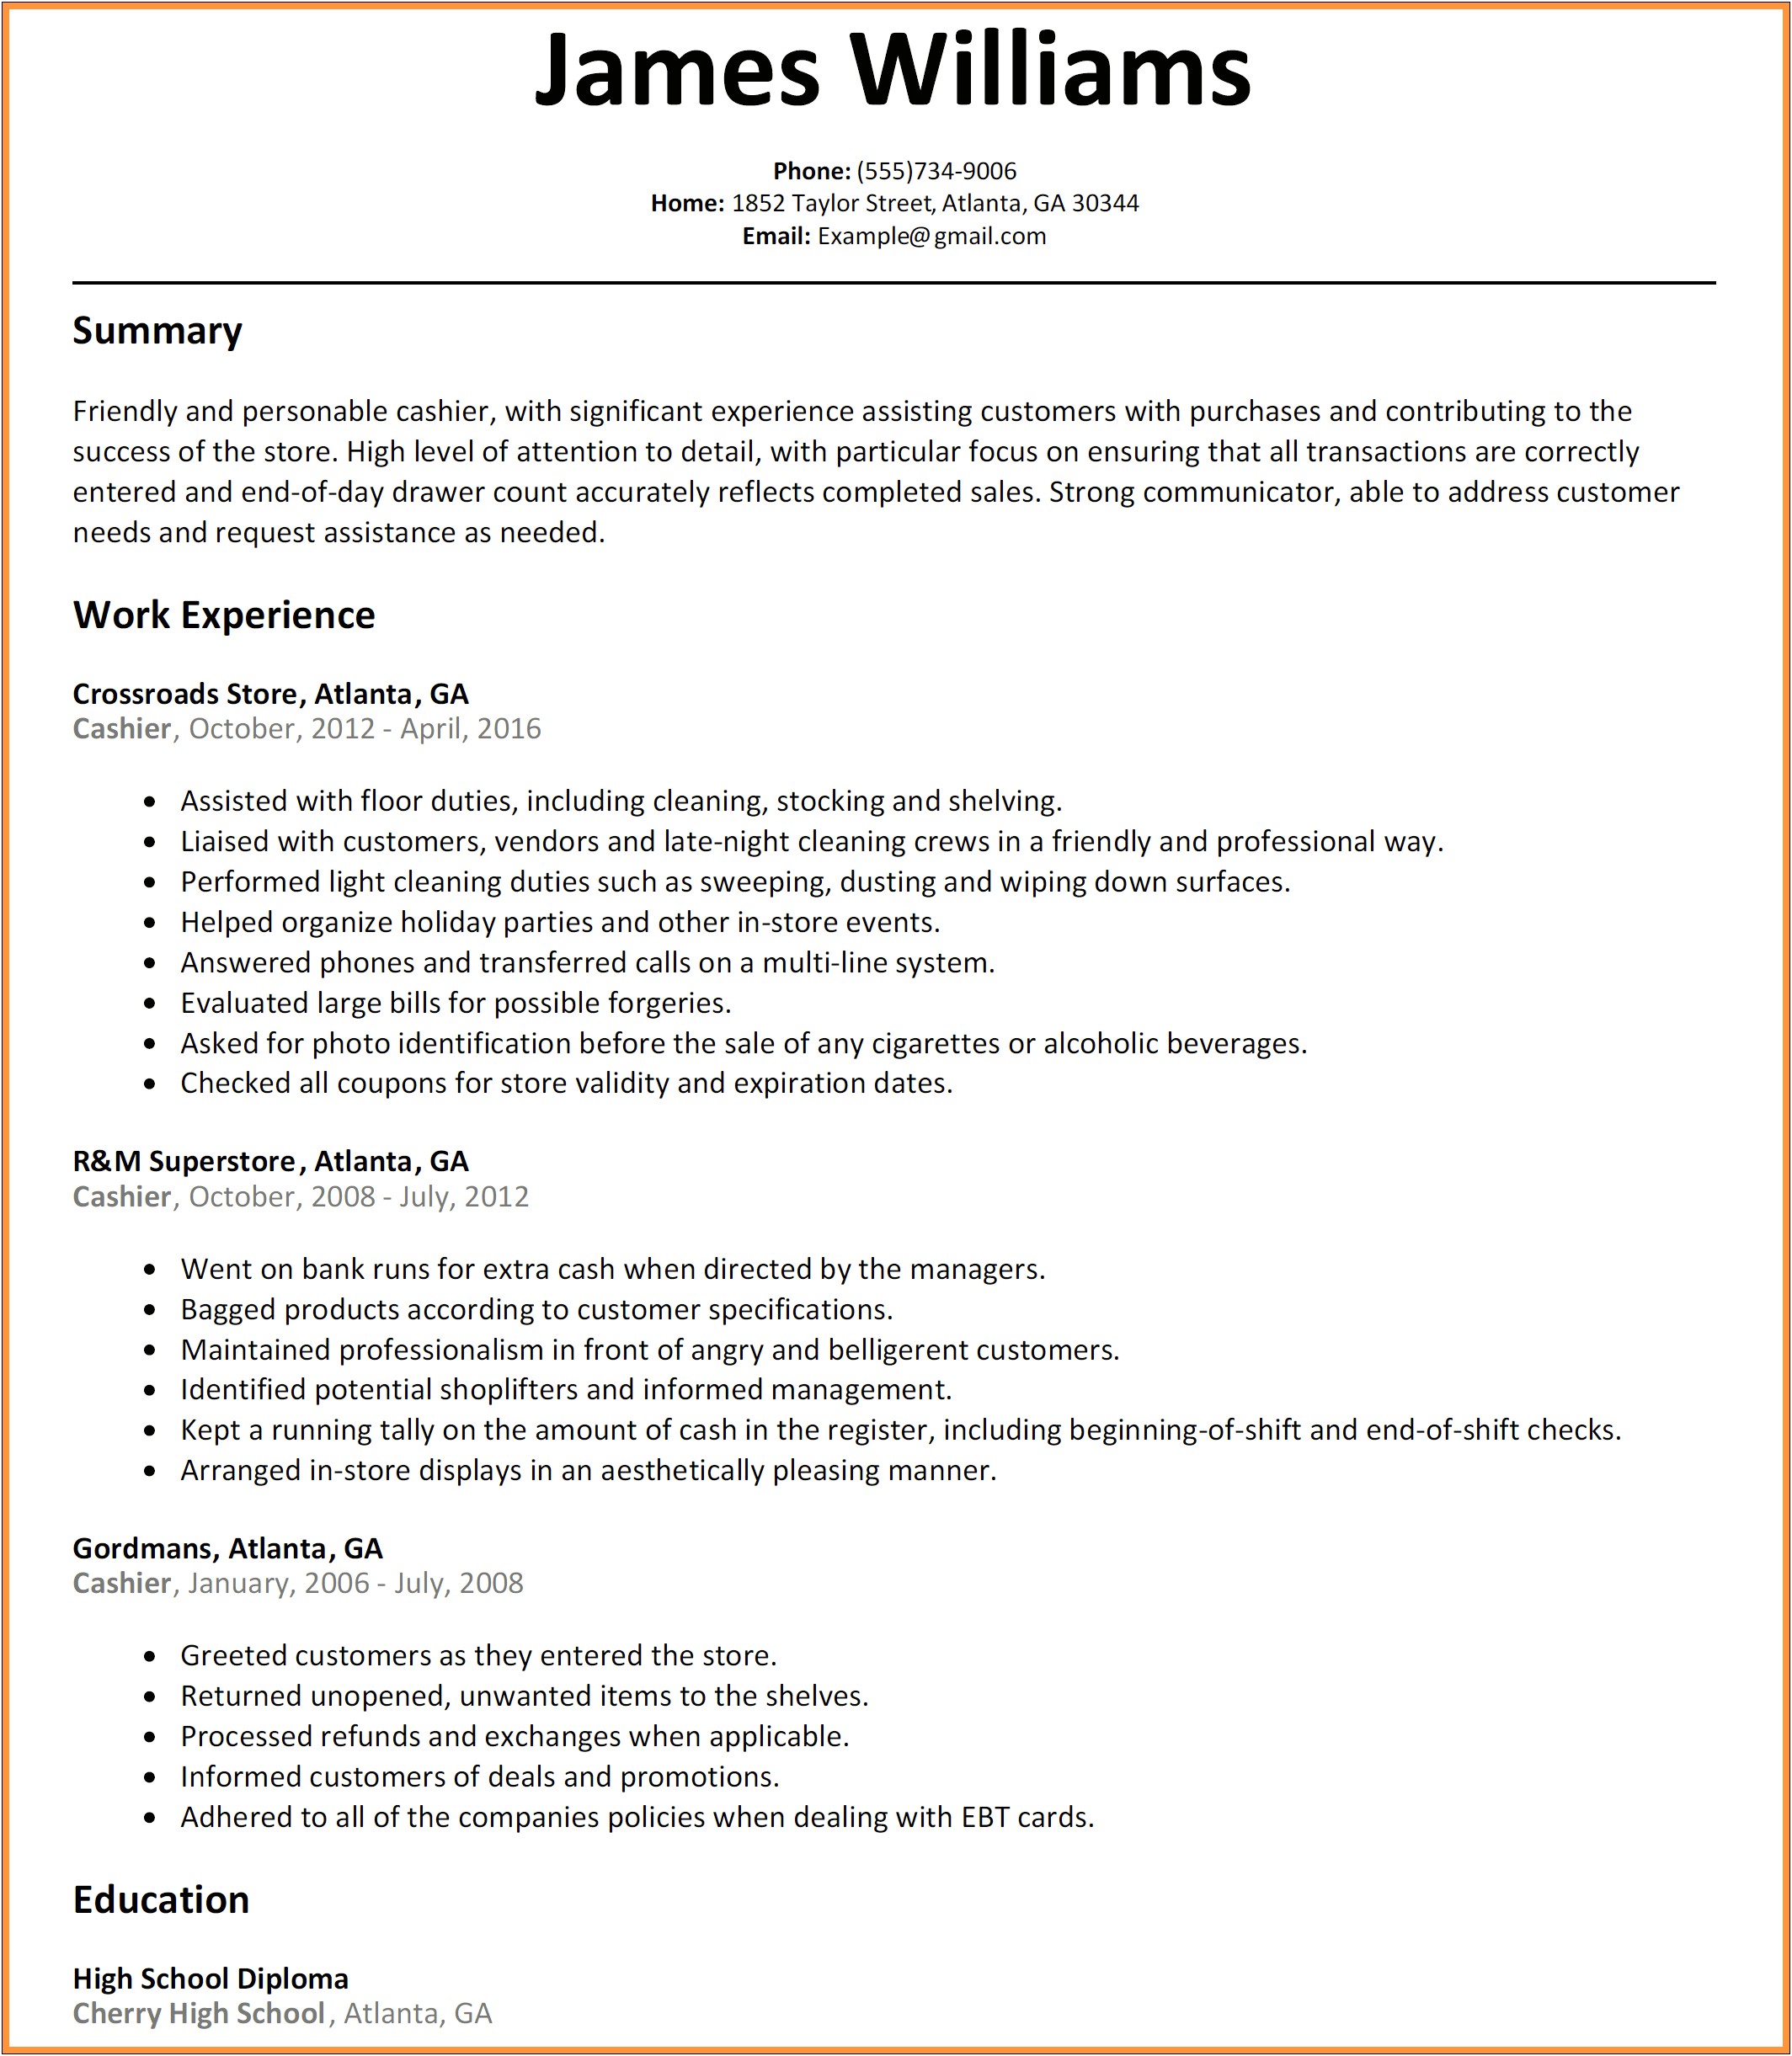 Examples Of Skills In A Resume For Cahsier